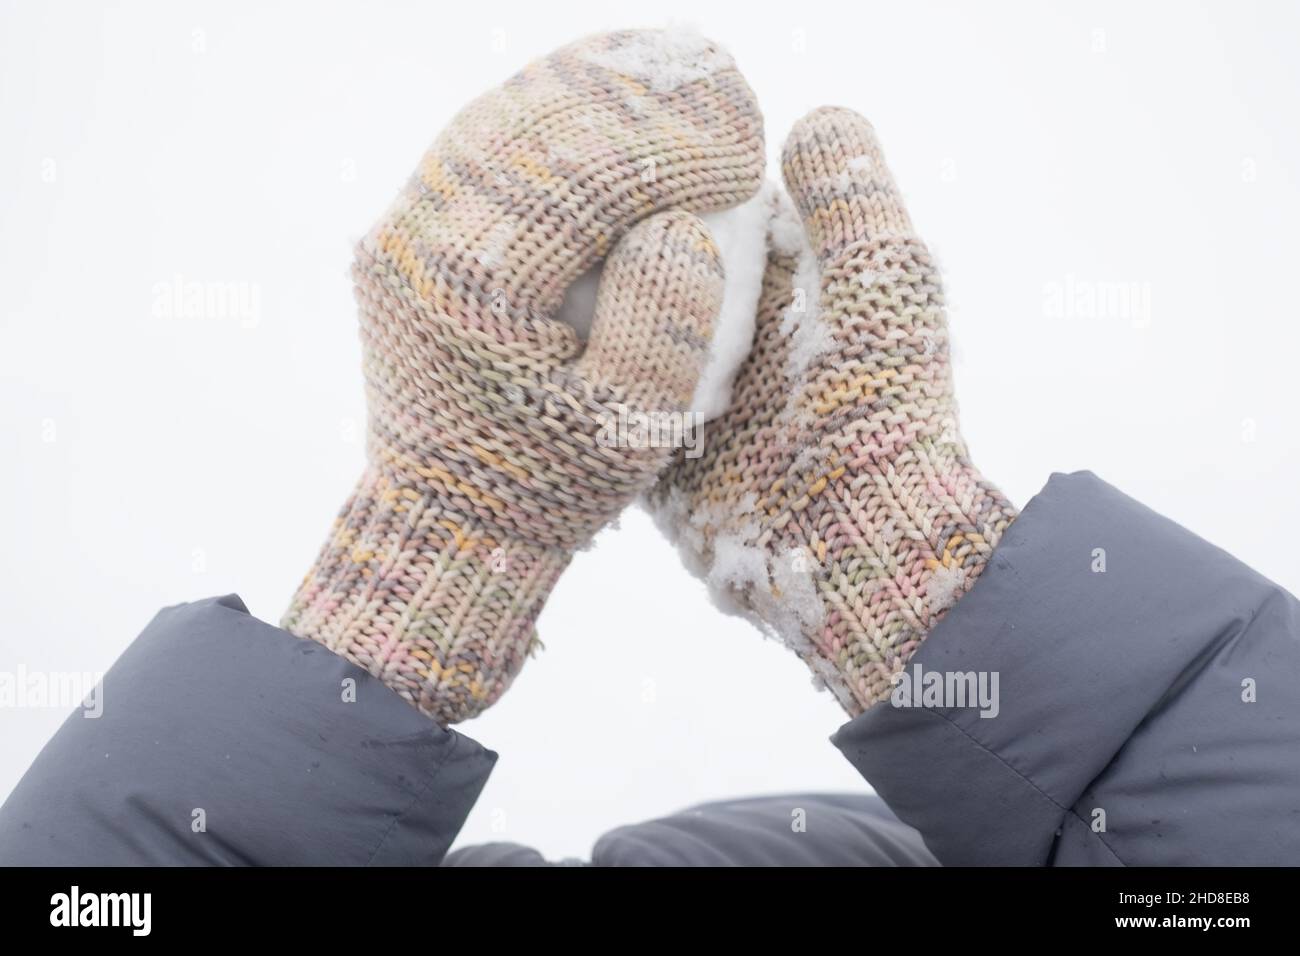 Snowball in the hand of a woman. ready for snow fight Stock Photo